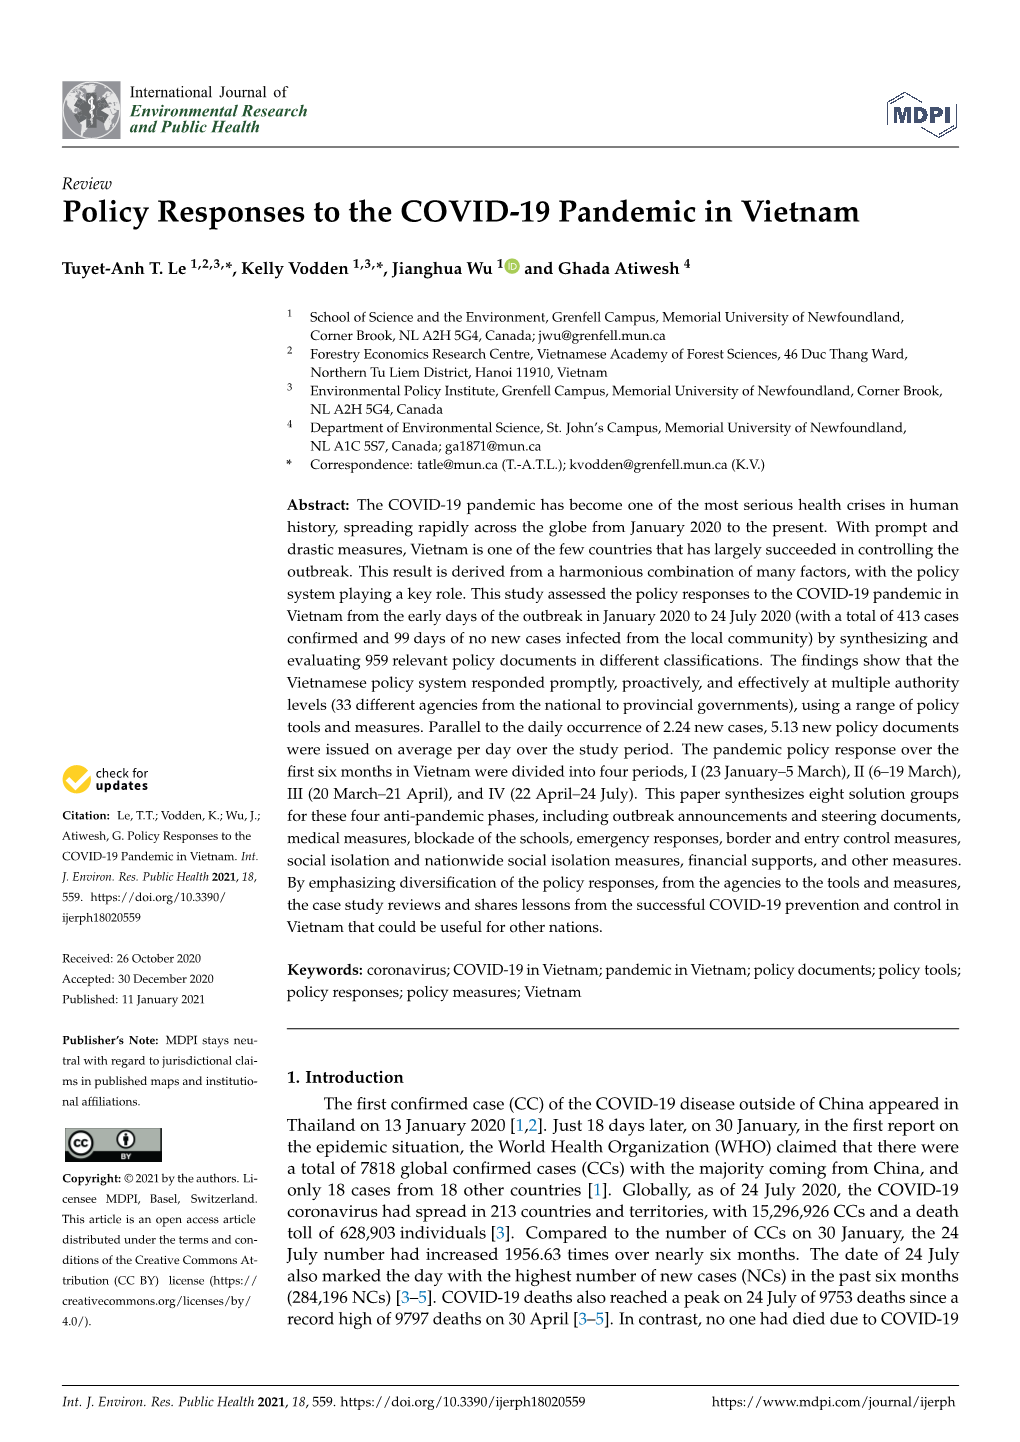 Policy Responses to the COVID-19 Pandemic in Vietnam